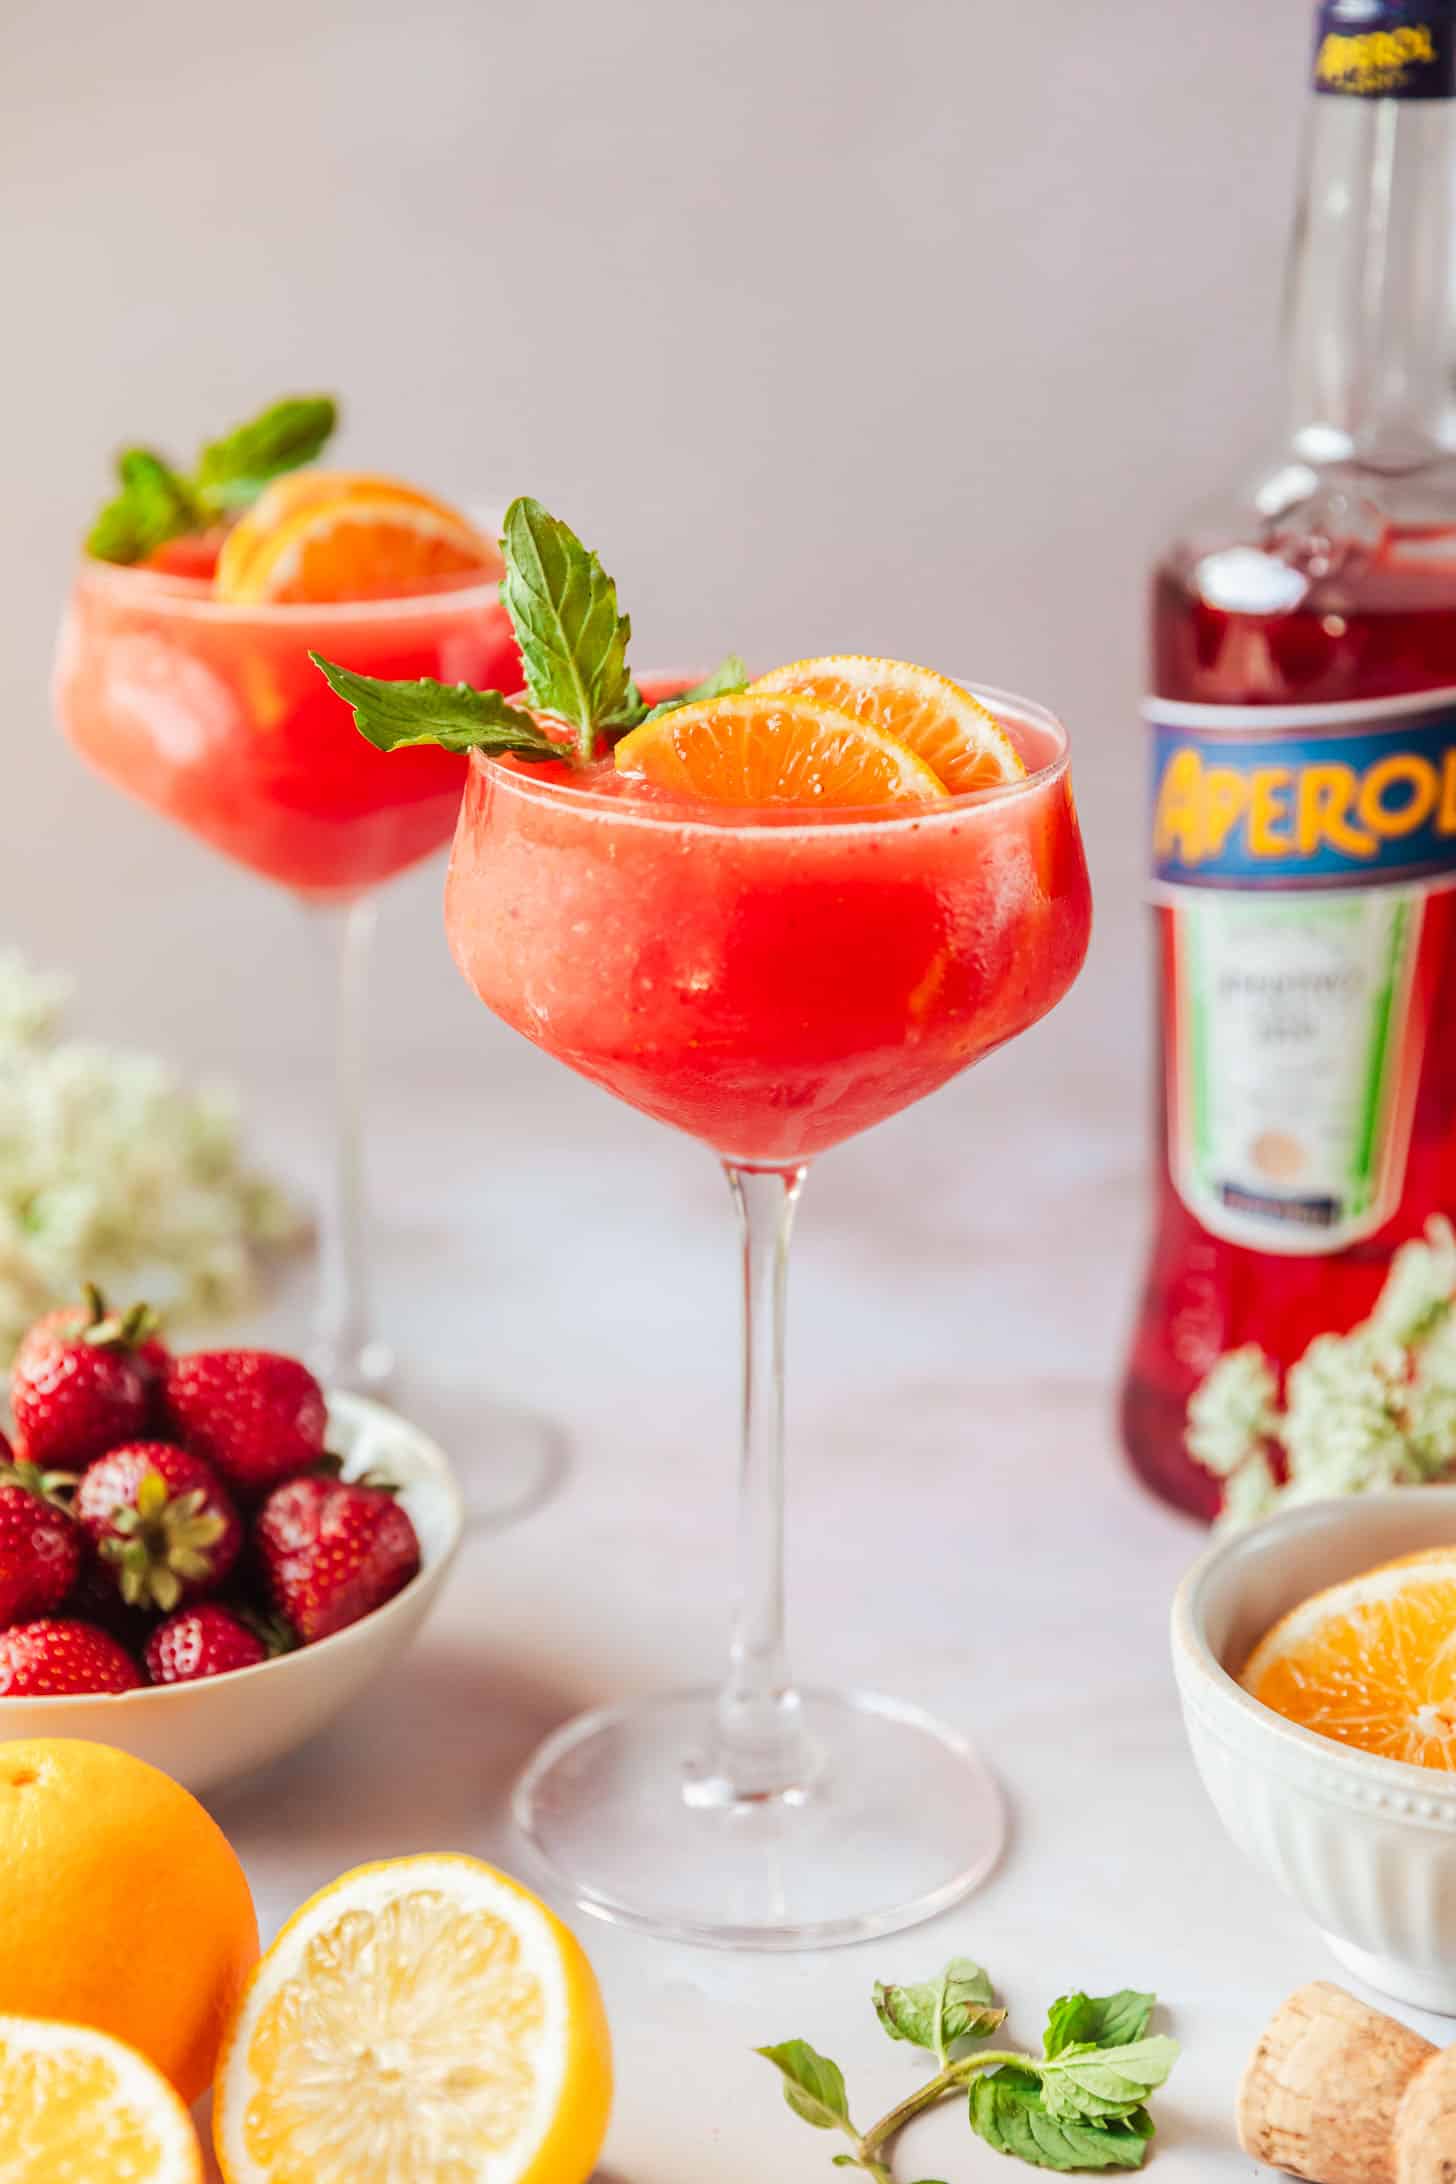 Two frozen Aperol spritz cocktails on a pink counter next to a white bowl of strawberries, a bottle of Aperol, white flowers, a white bowl of orange slices, and lemons.